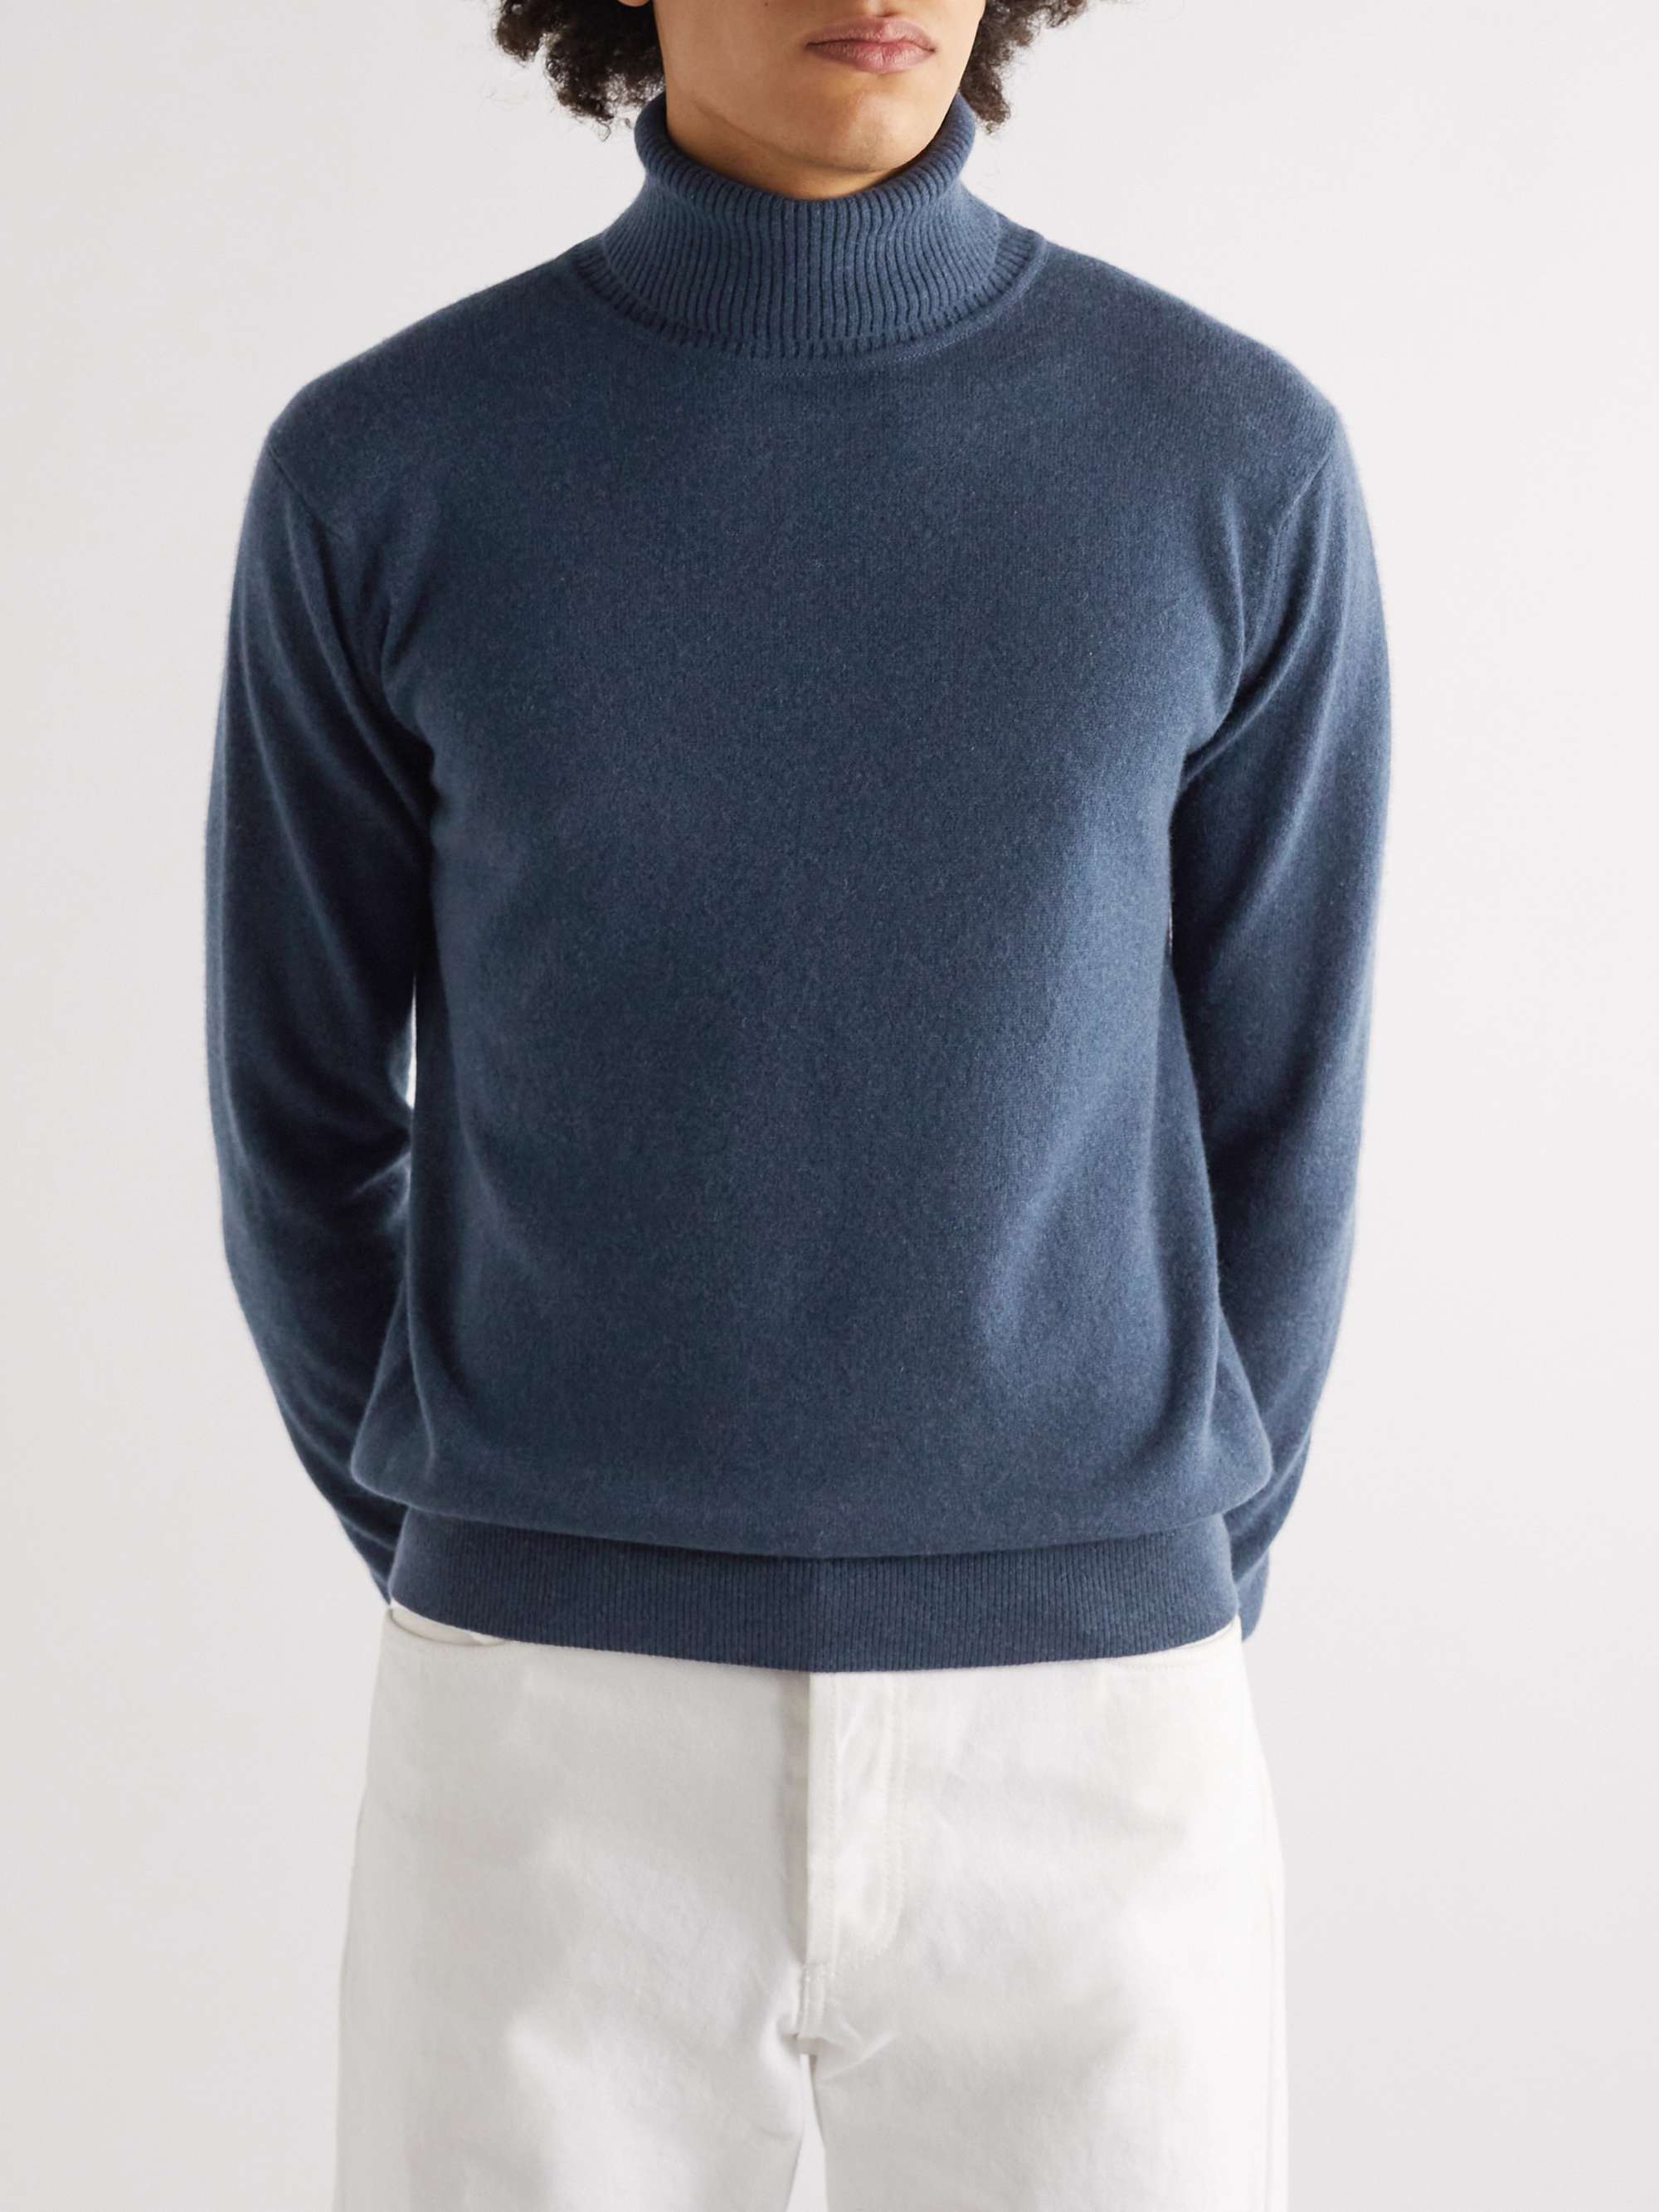 TOM FORD Cashmere Rollneck Sweater